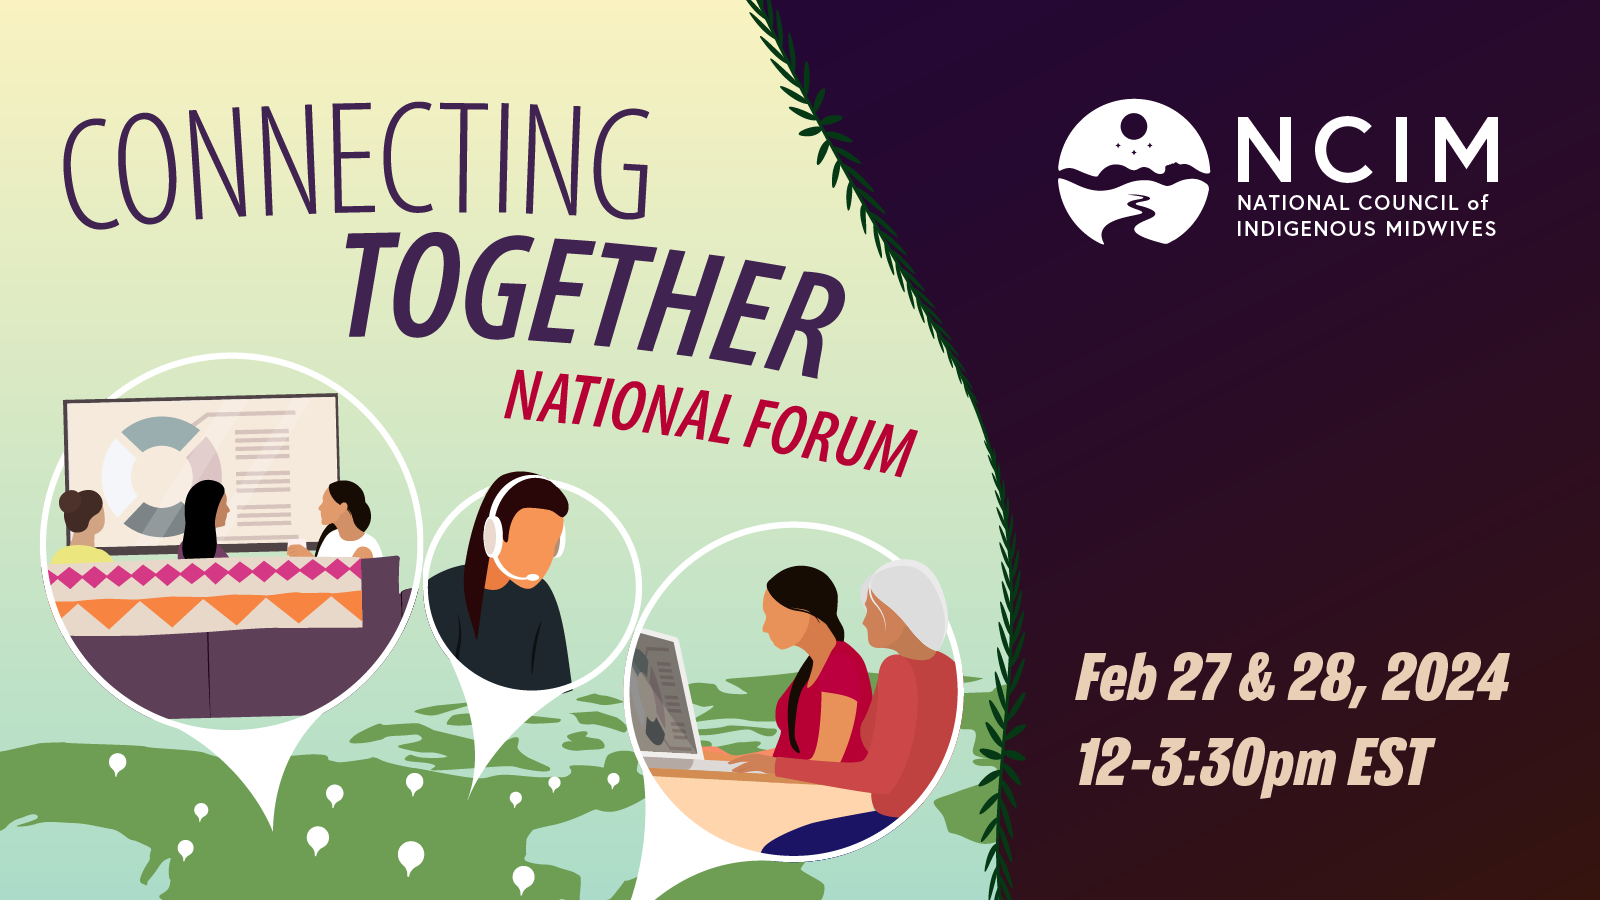 Text reads: Connecting Together National Forum February 27&28, 2024, 12-3:30pm EST